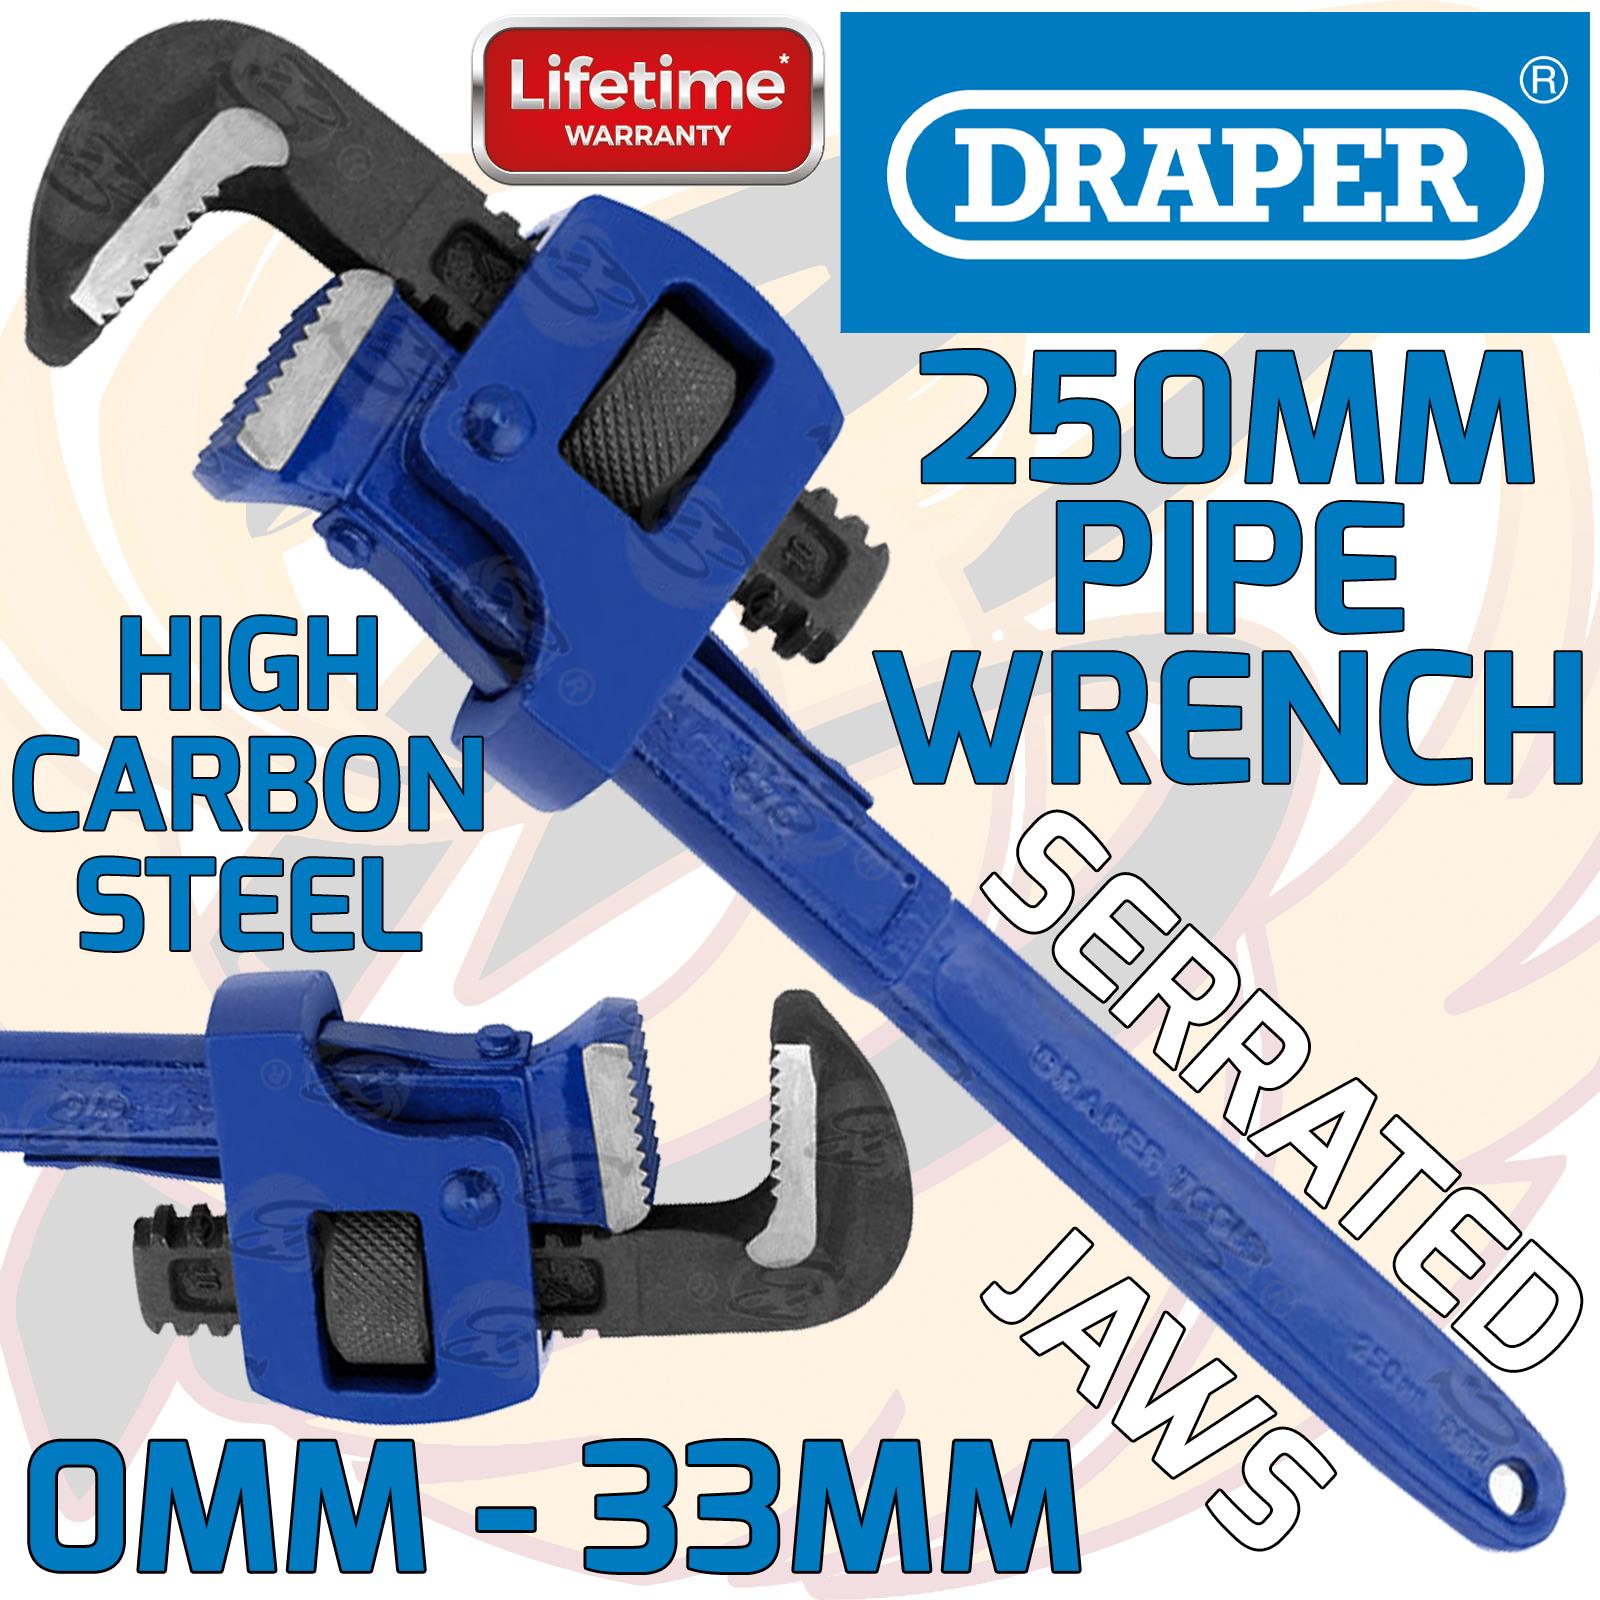 DRAPER 250MM ADJUSTABLE PIPE WRENCH